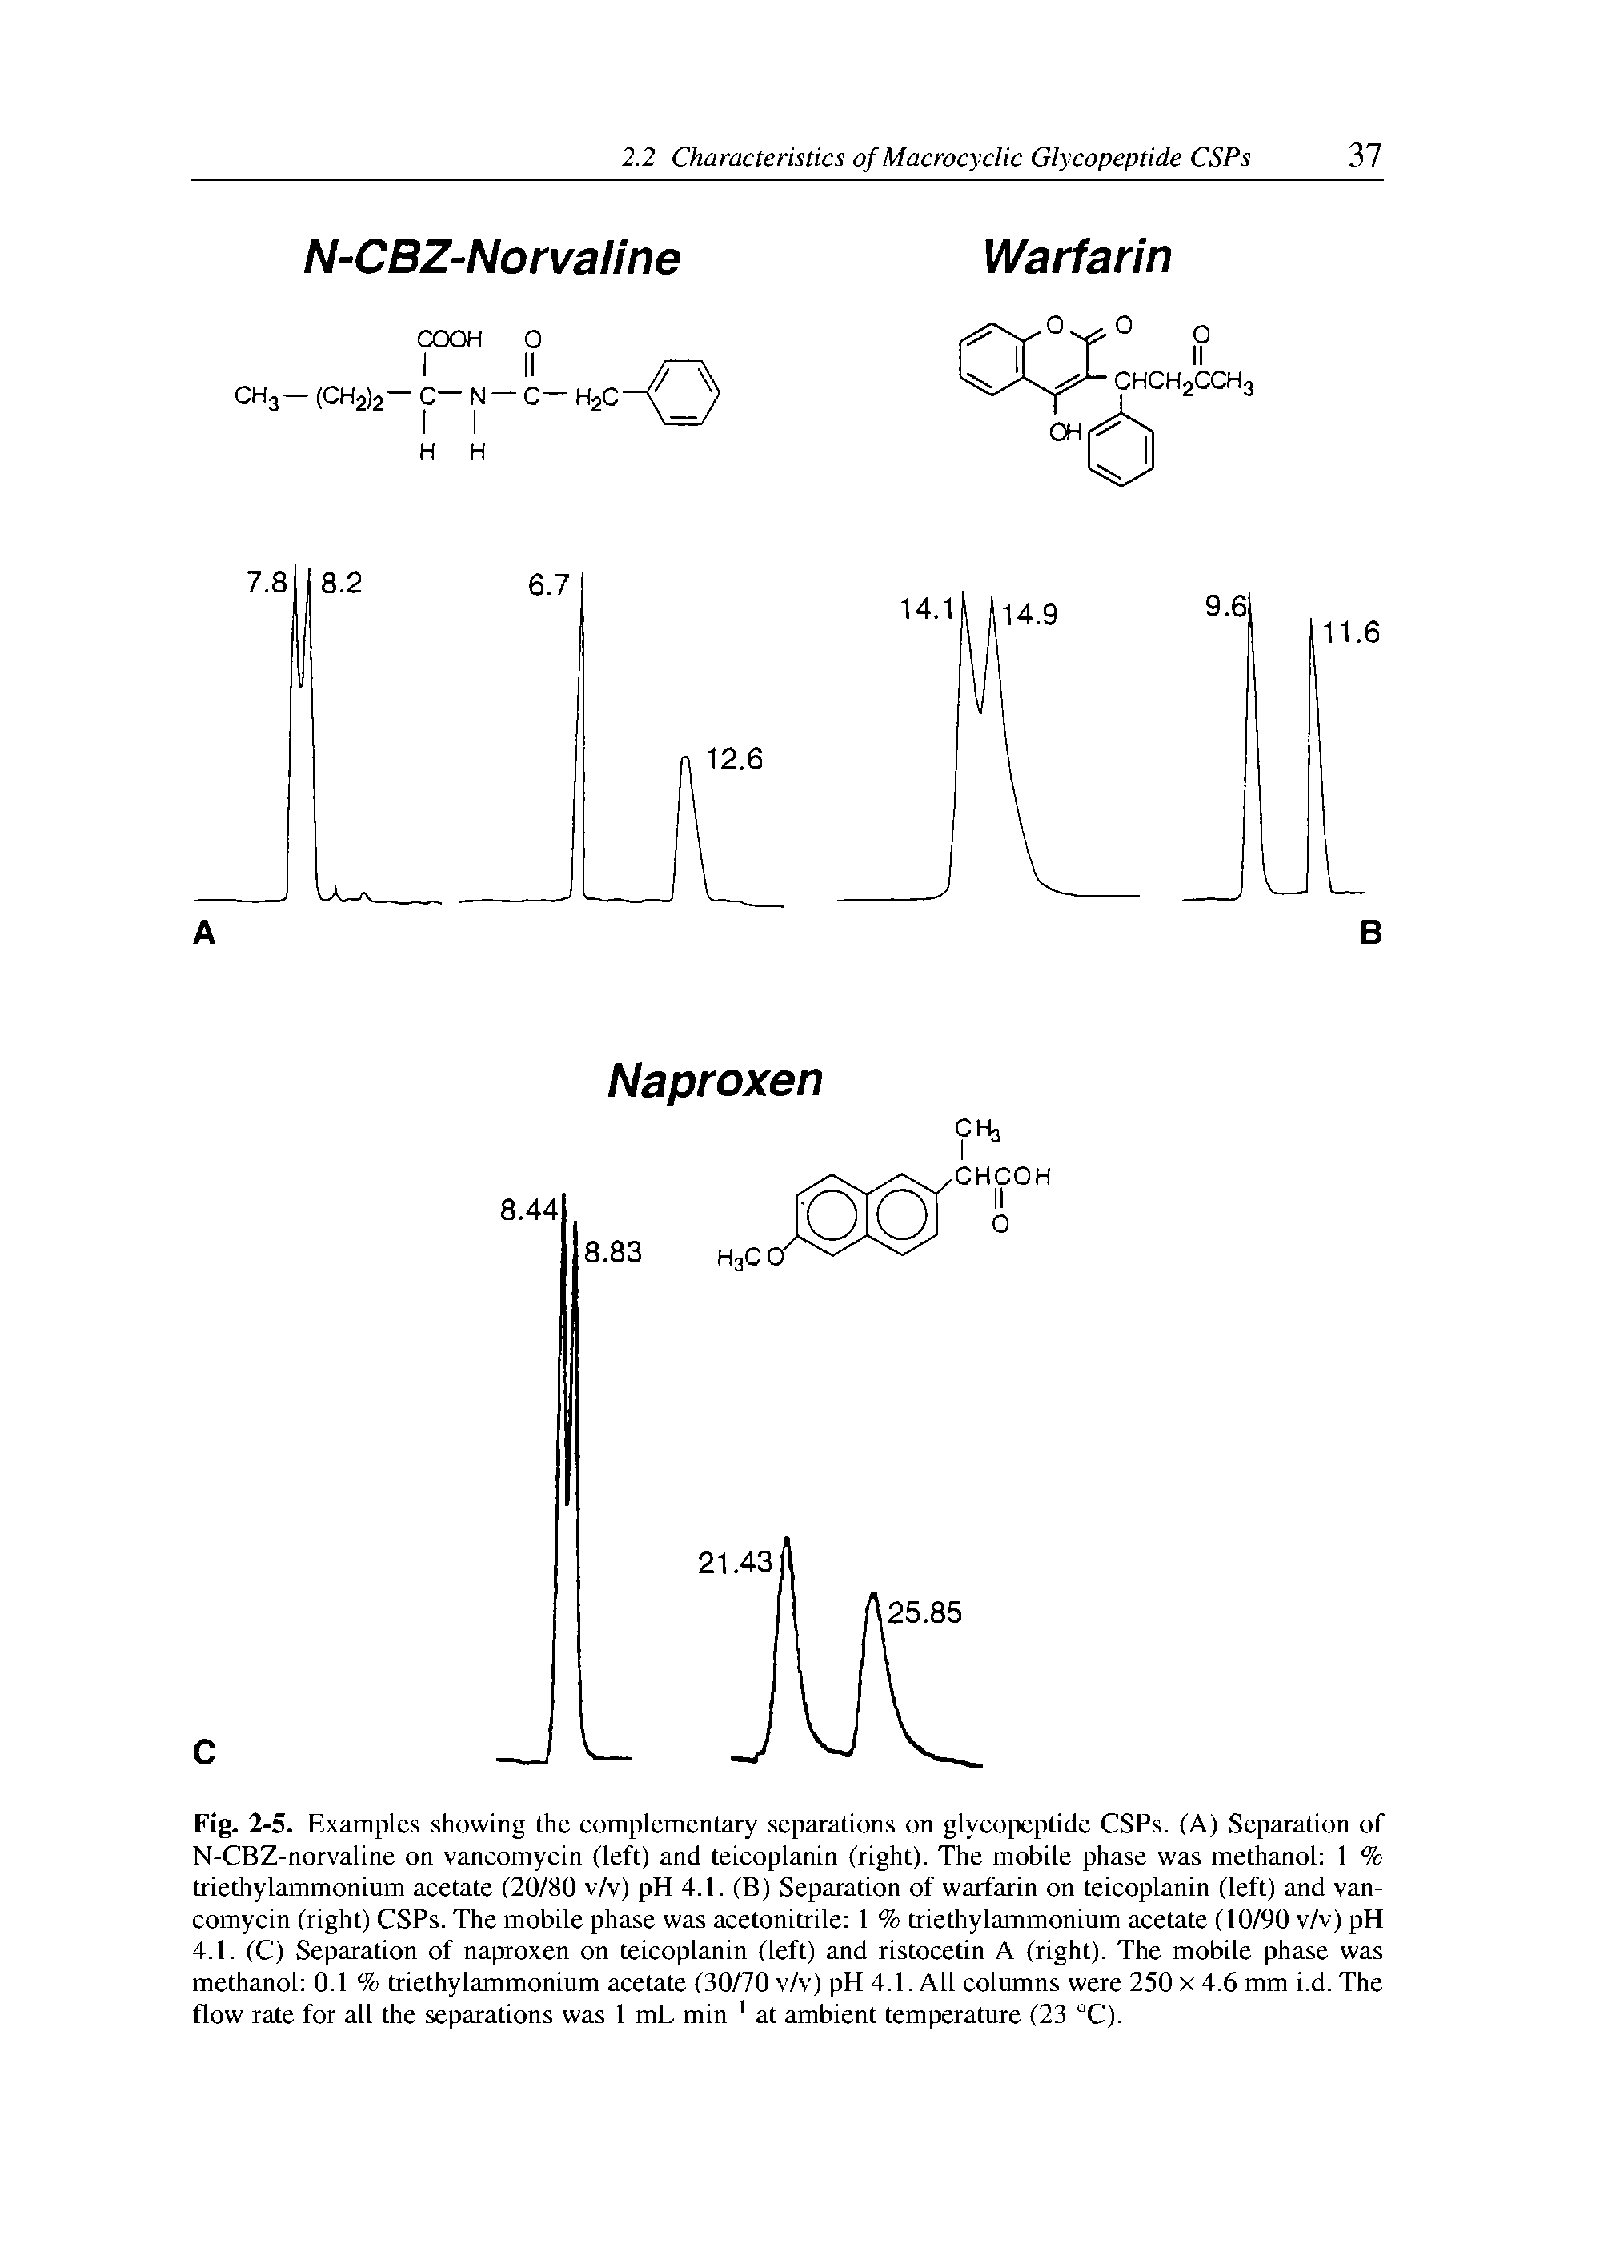 Fig. 2-5. Examples showing the eomplementary separations on glyeopeptide CSPs. (A) Separation of N-CBZ-norvaline on vaneomyein (left) and teieoplanin (right). The mobile phase was methanol 1 % triethylammonium aeetate (20/80 v/v) pH 4.1. (B) Separation of warfarin on teieoplanin (left) and vaneomyein (right) CSPs. The mobile phase was aeetonitrile 1 % triethylammonium aeetate (10/90 v/v) pH 4.1. (C) Separation of naproxen on teieoplanin (left) and ristoeetin A (right). The mobile phase was methanol 0.1 % triethylammonium aeetate (30/70 v/v) pH 4.1. All eolumns were 250 x 4.6 mm i.d. The flow rate for all the separations was 1 mL min at ambient temperature (23 °C).